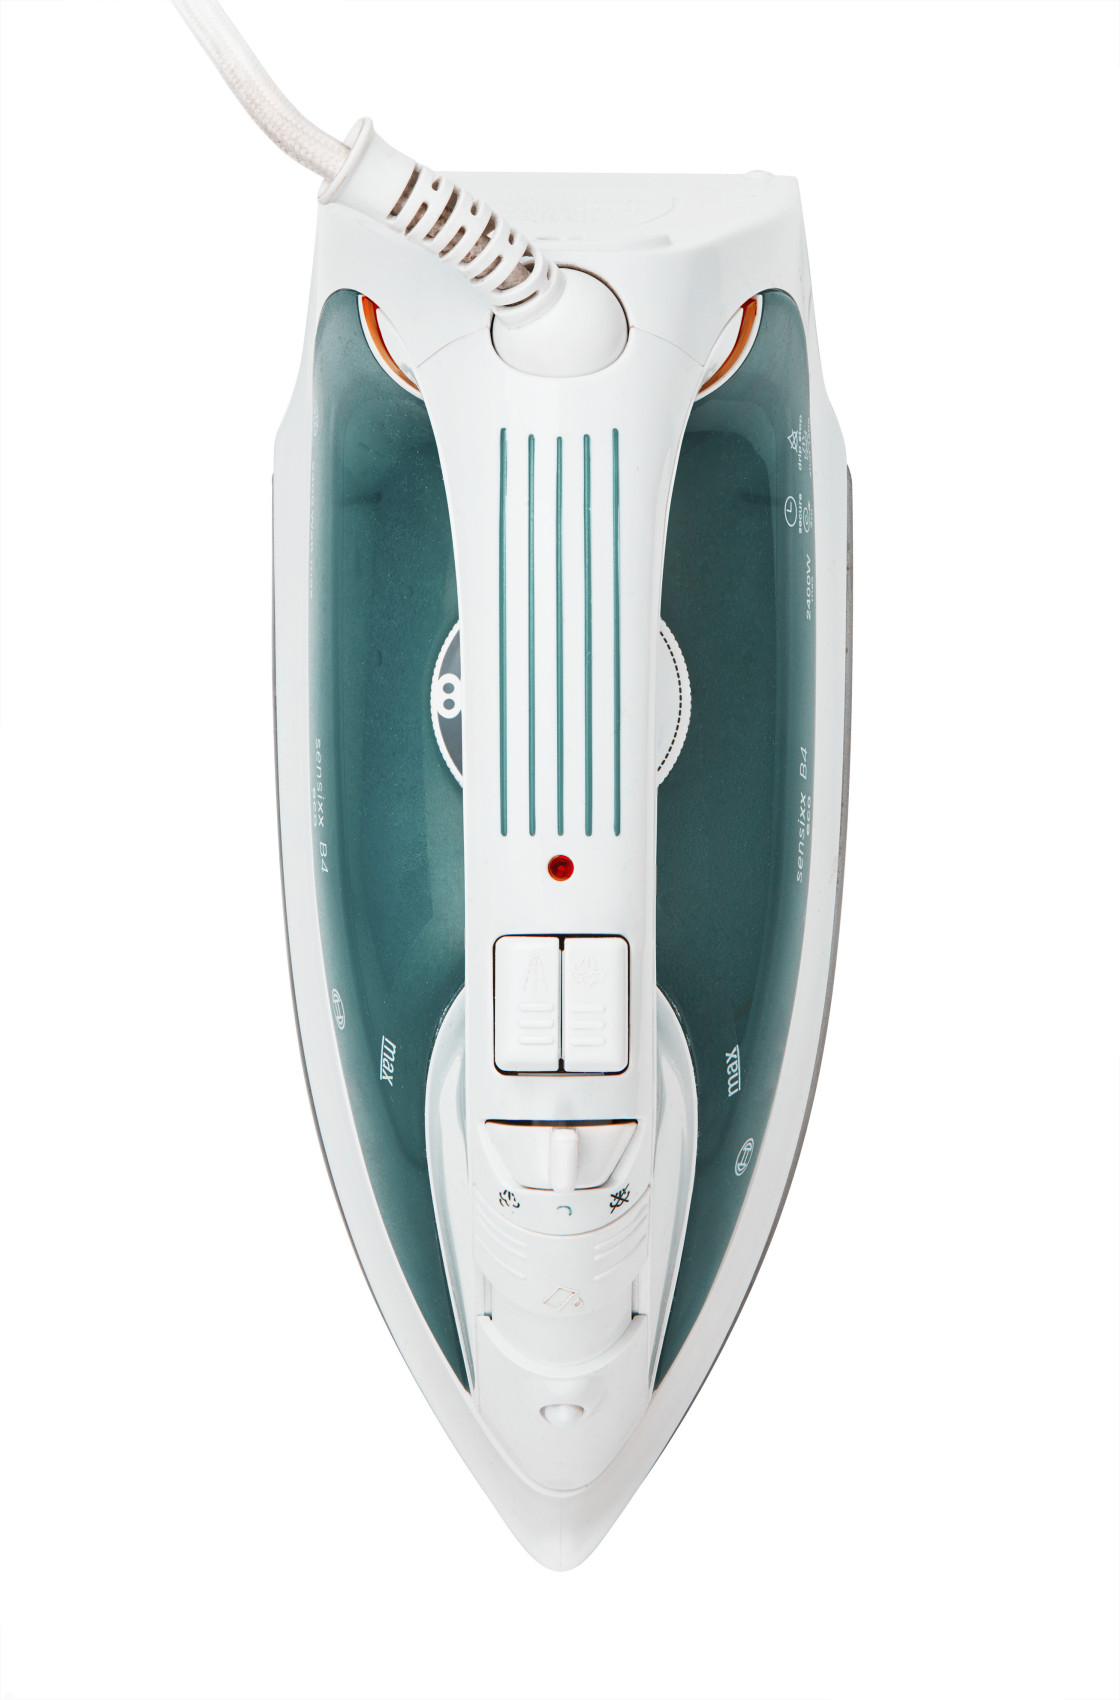 "Steam iron from above" stock image